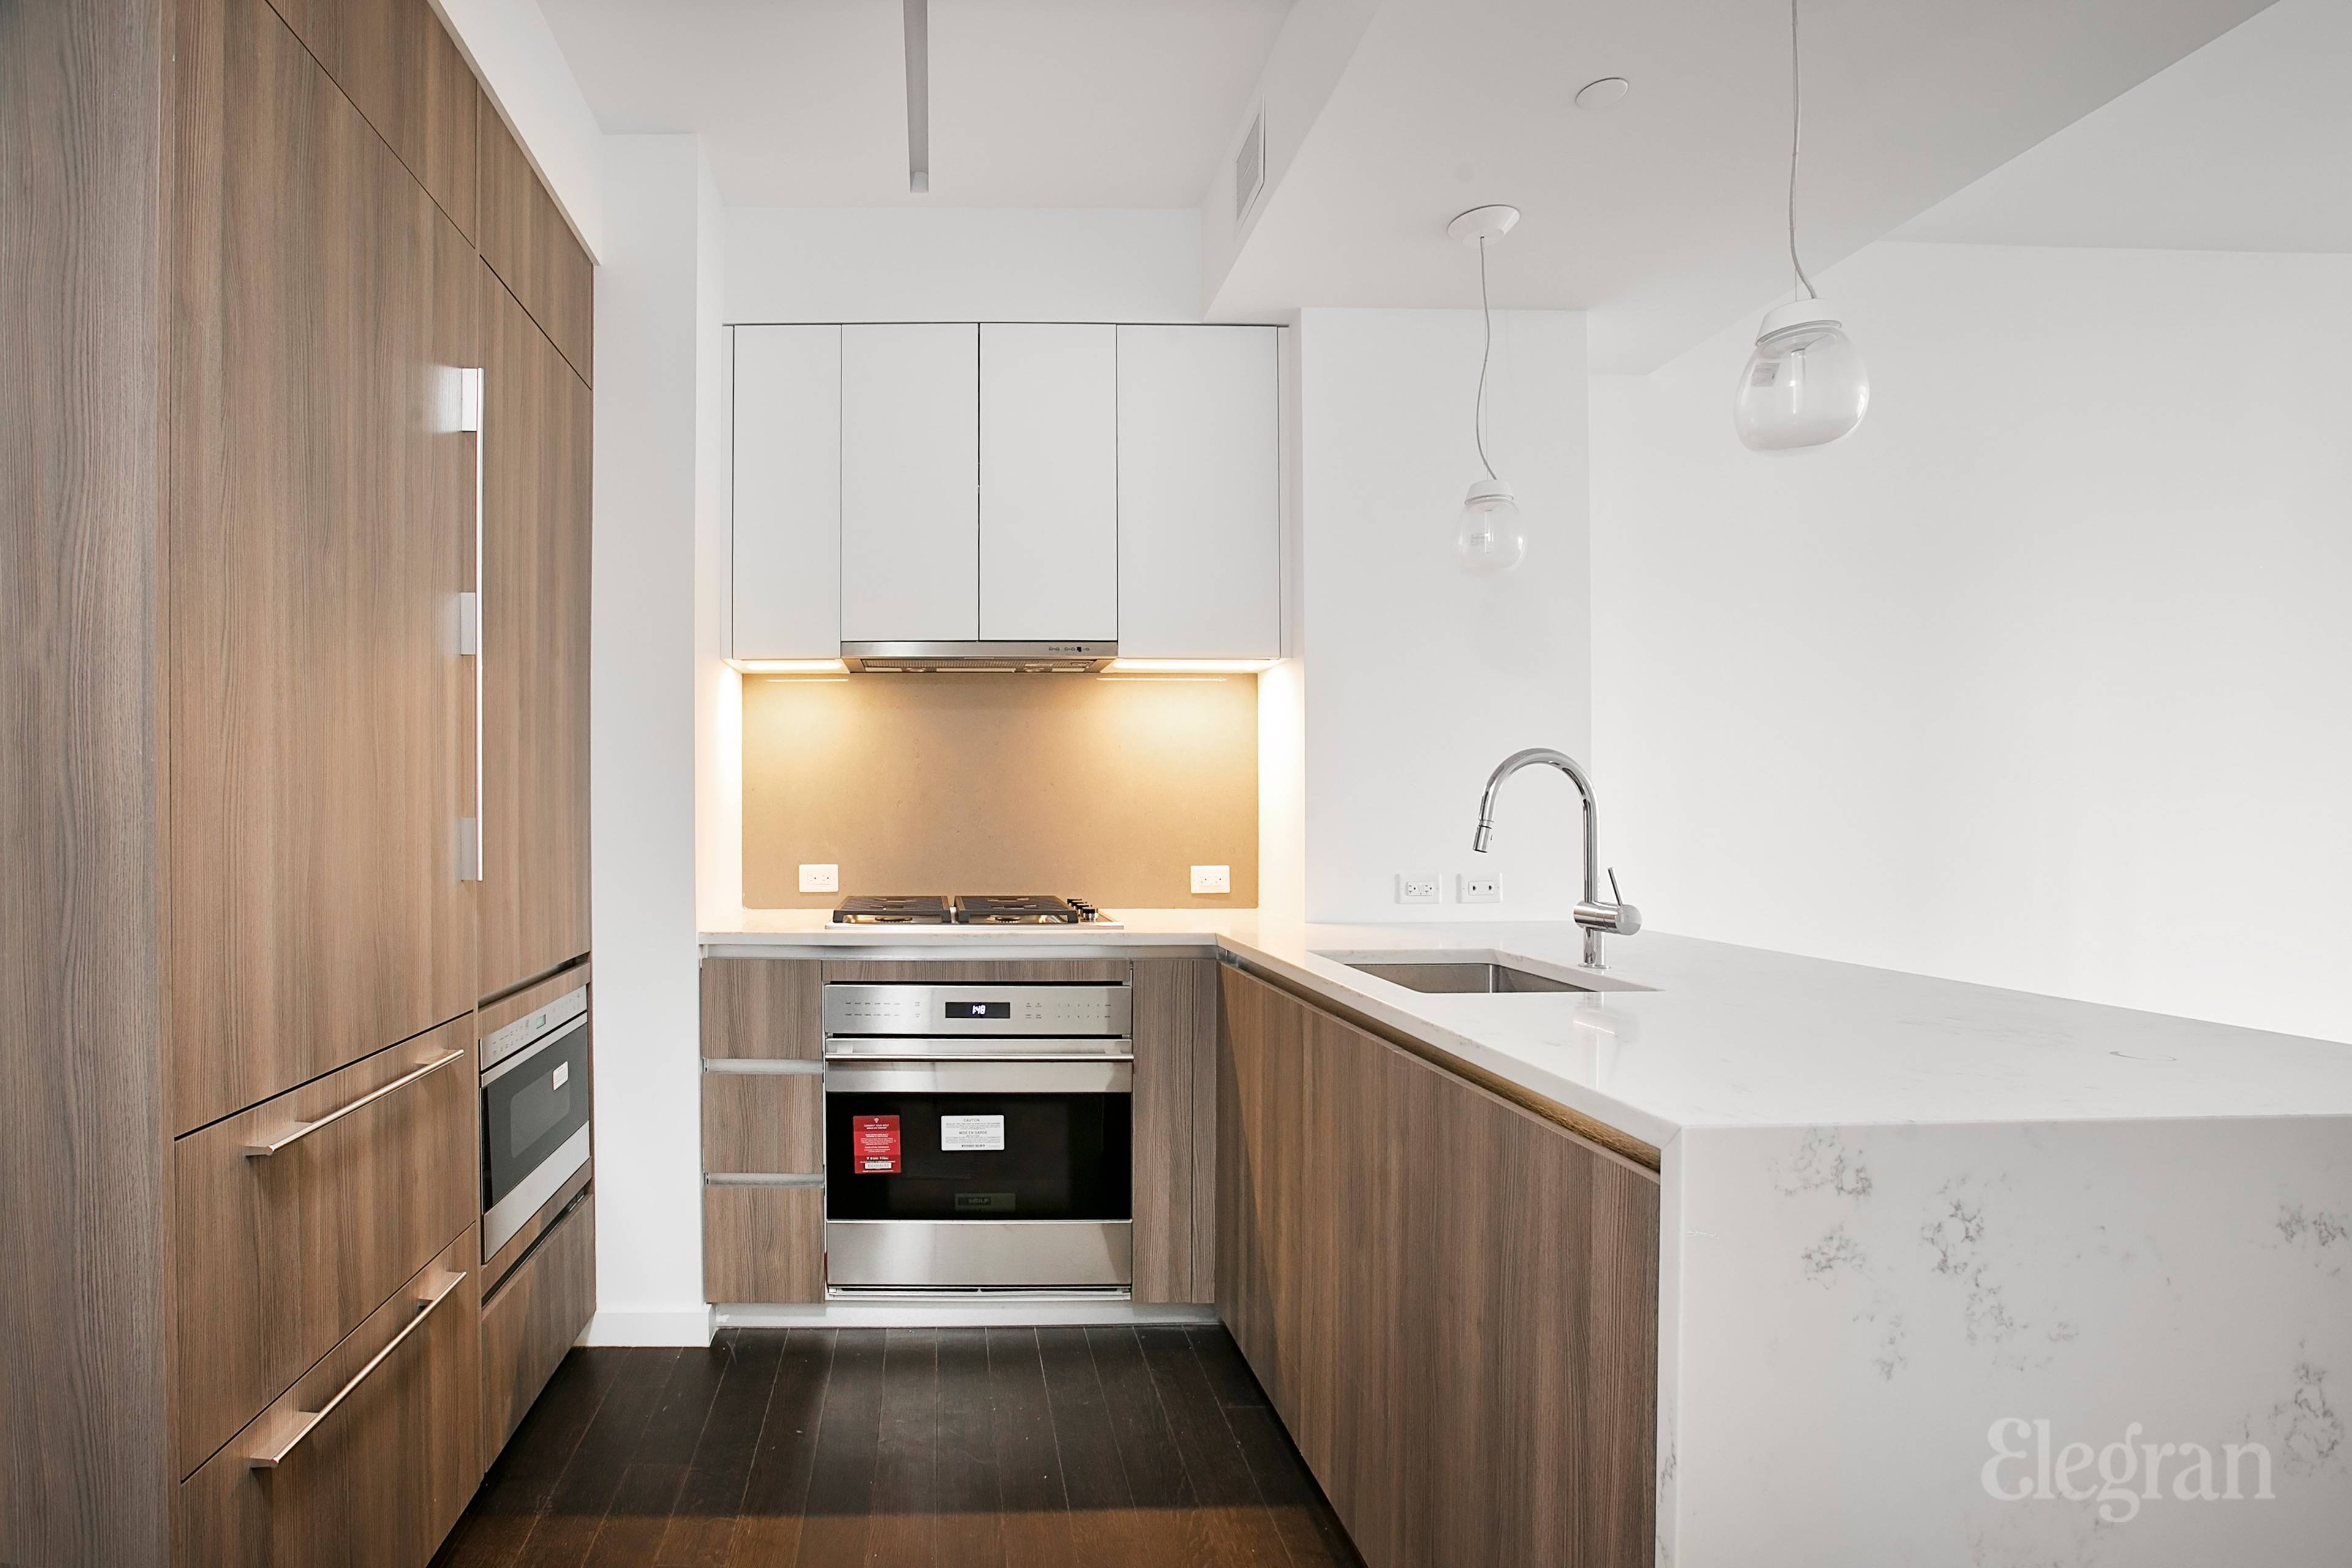 Spacious 1 bedroom apartment available at The Lindley, a modern, centrally located Manhattan building featuring amenities designed with both luxury and convenience in mind.